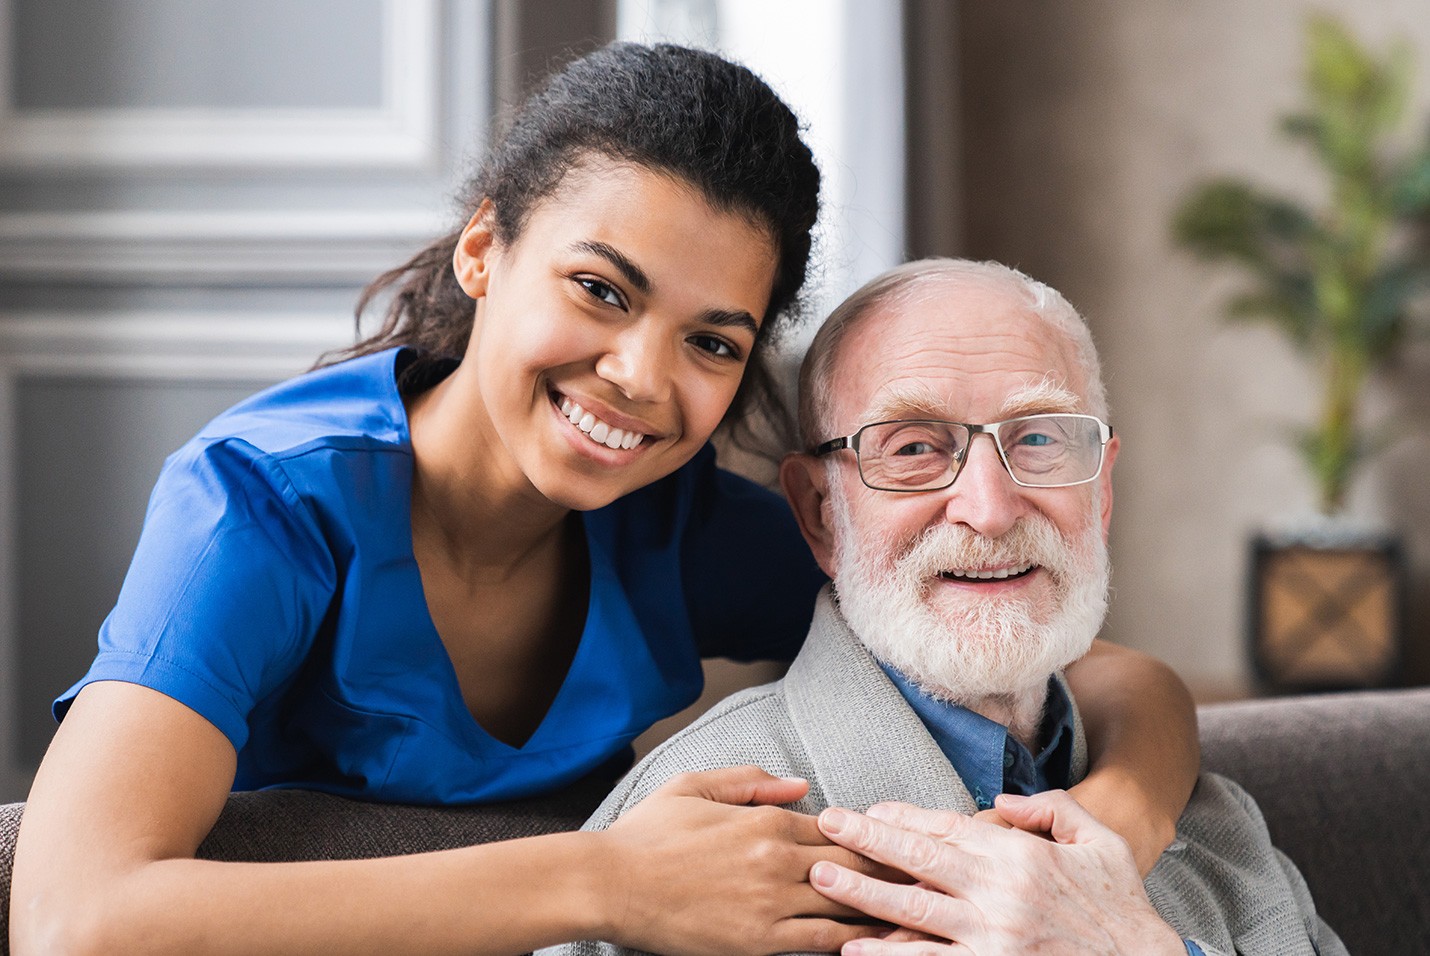 Tips for Caring for a Loved One with Parkinson’s Disease